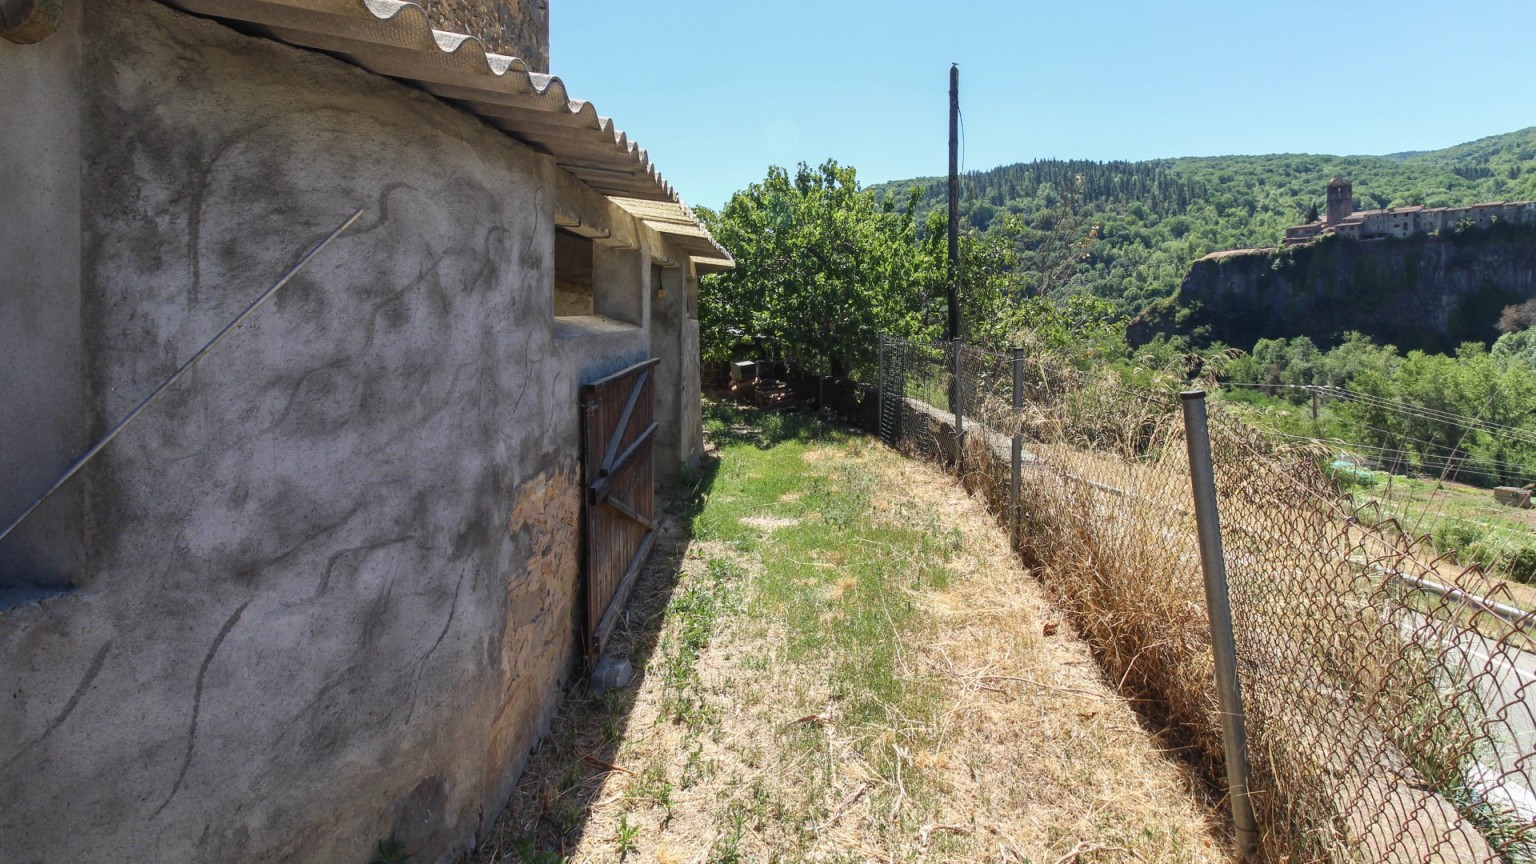 Rural property for sale in the town of Montagut.